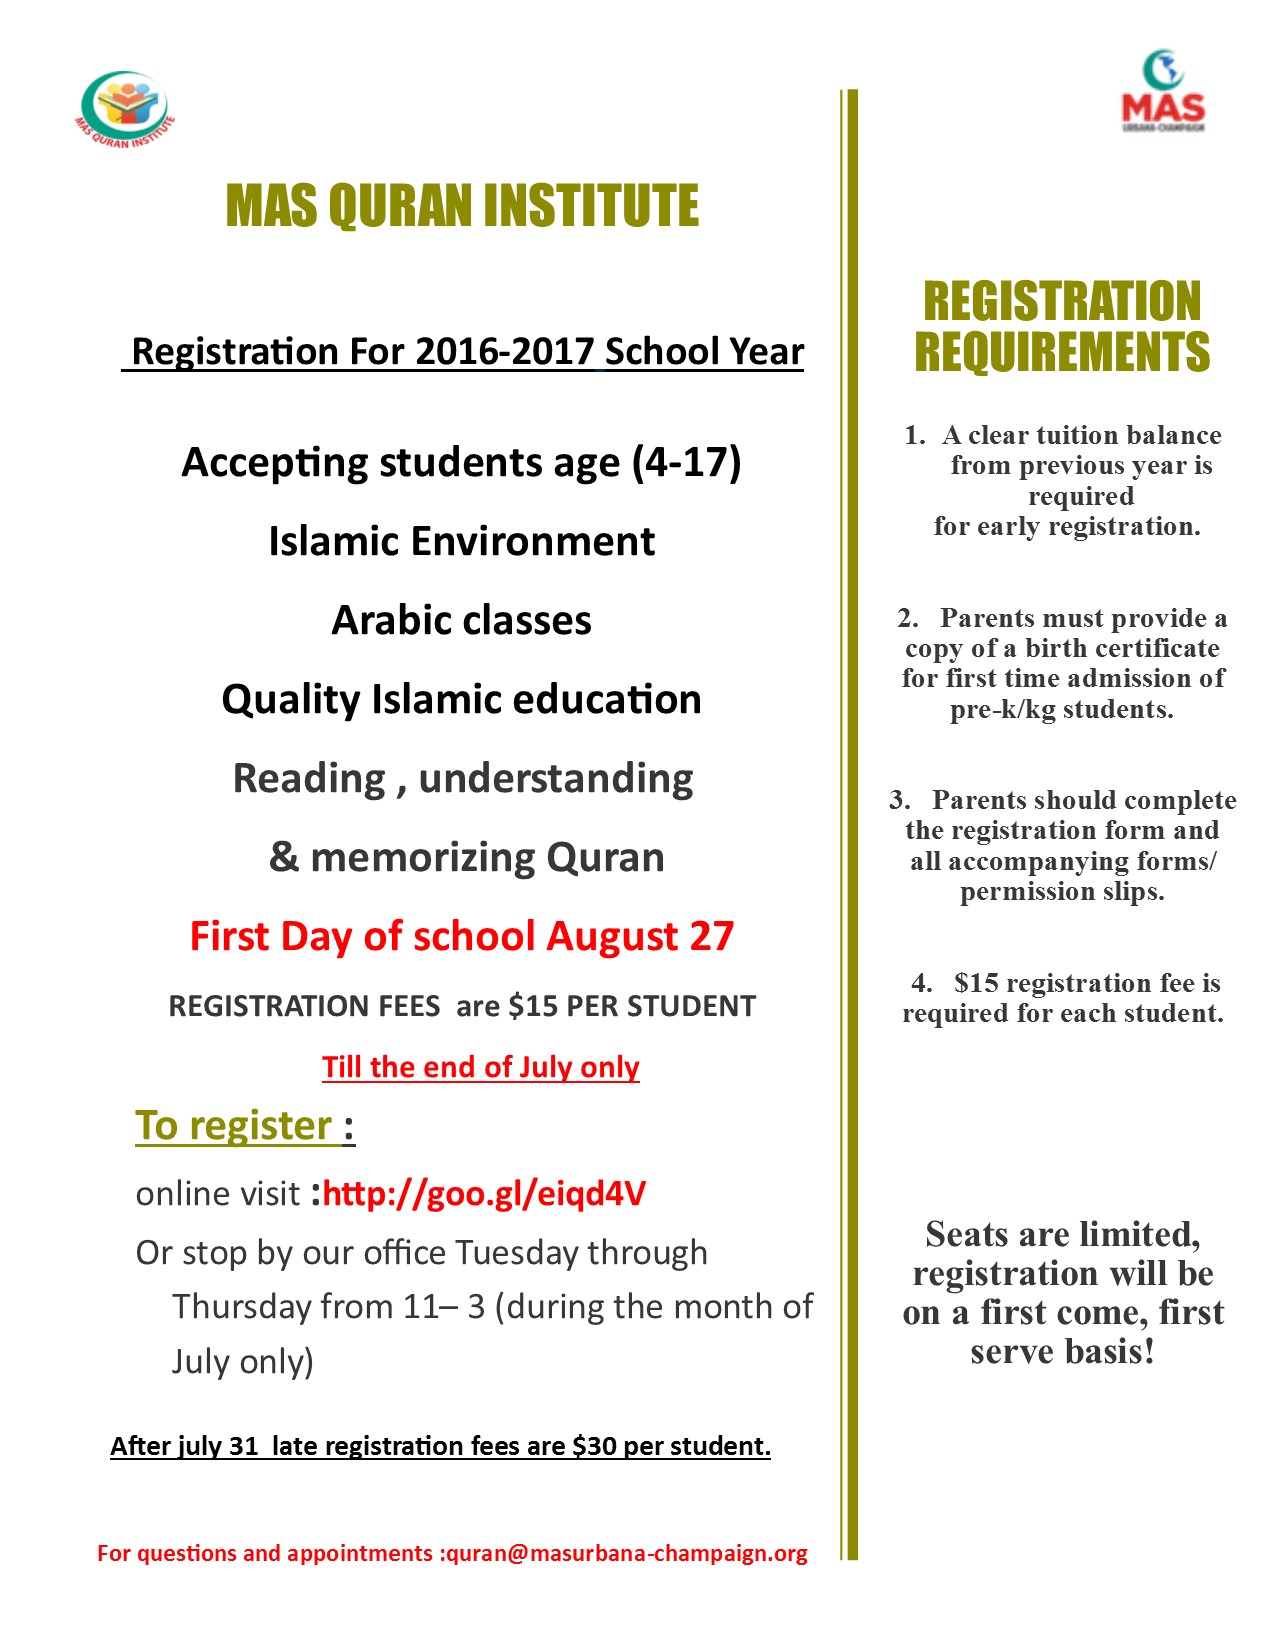 early registration 2015-2016